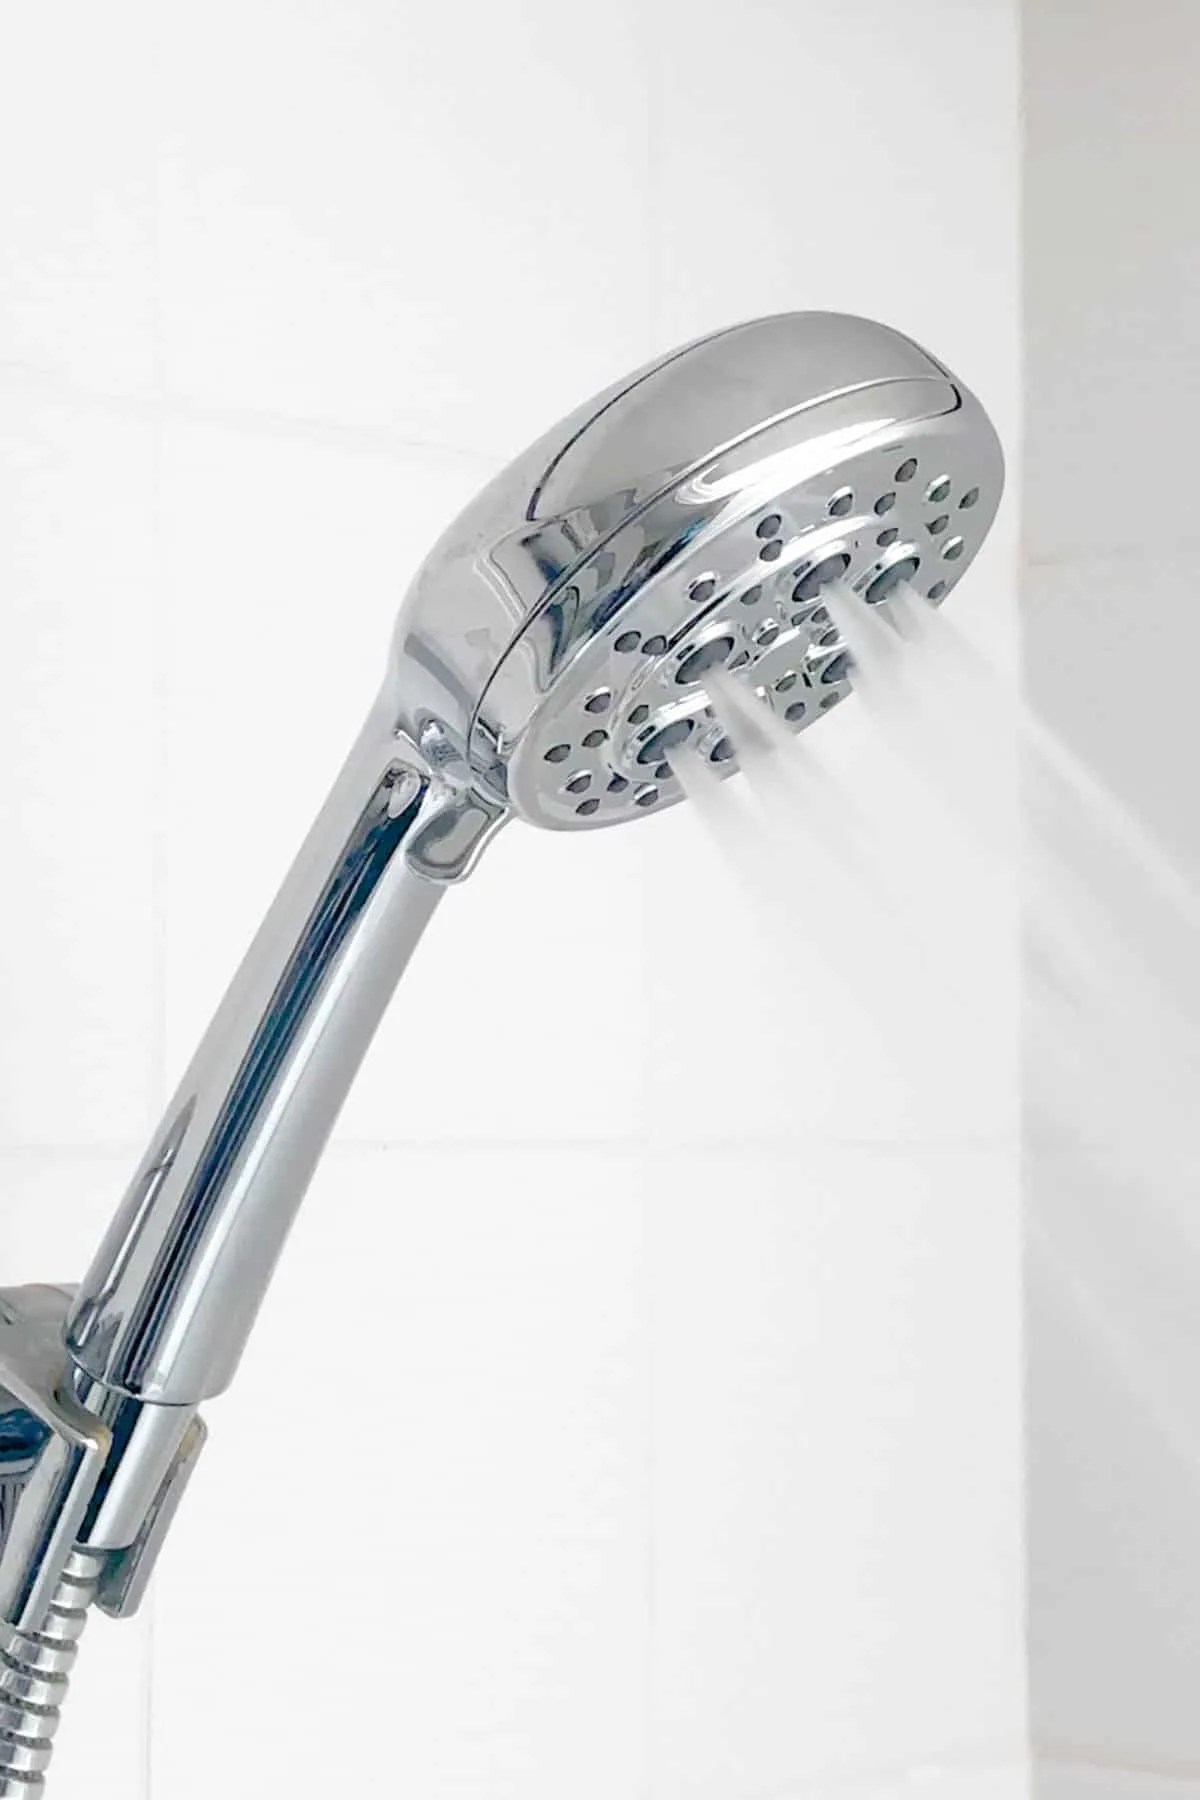 Why You Need A Hand Wand Shower Head